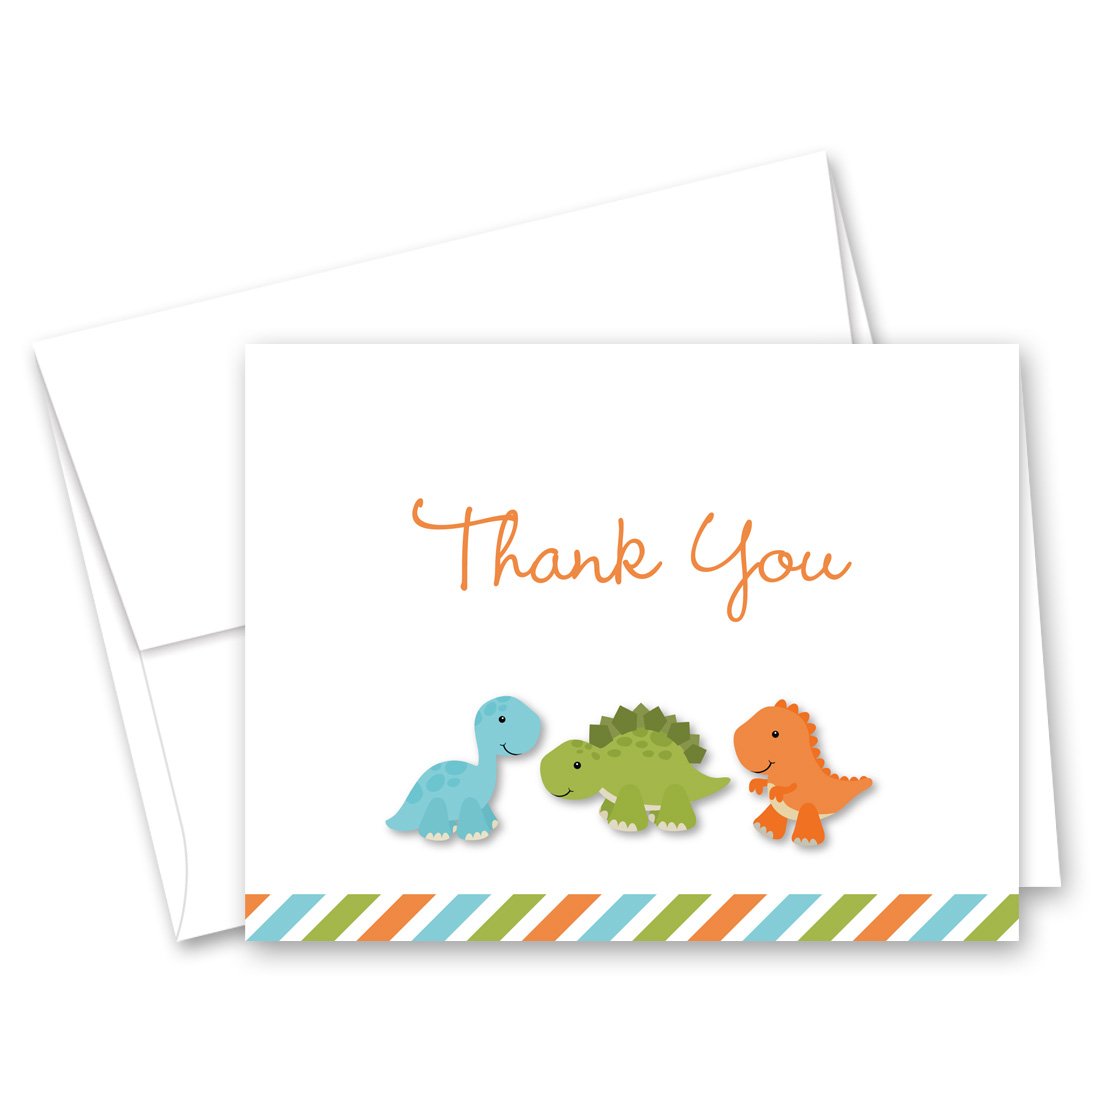 MyExpression.com 50 Cnt Dinosaur Baby Shower or Kids Birthday Thank You Cards